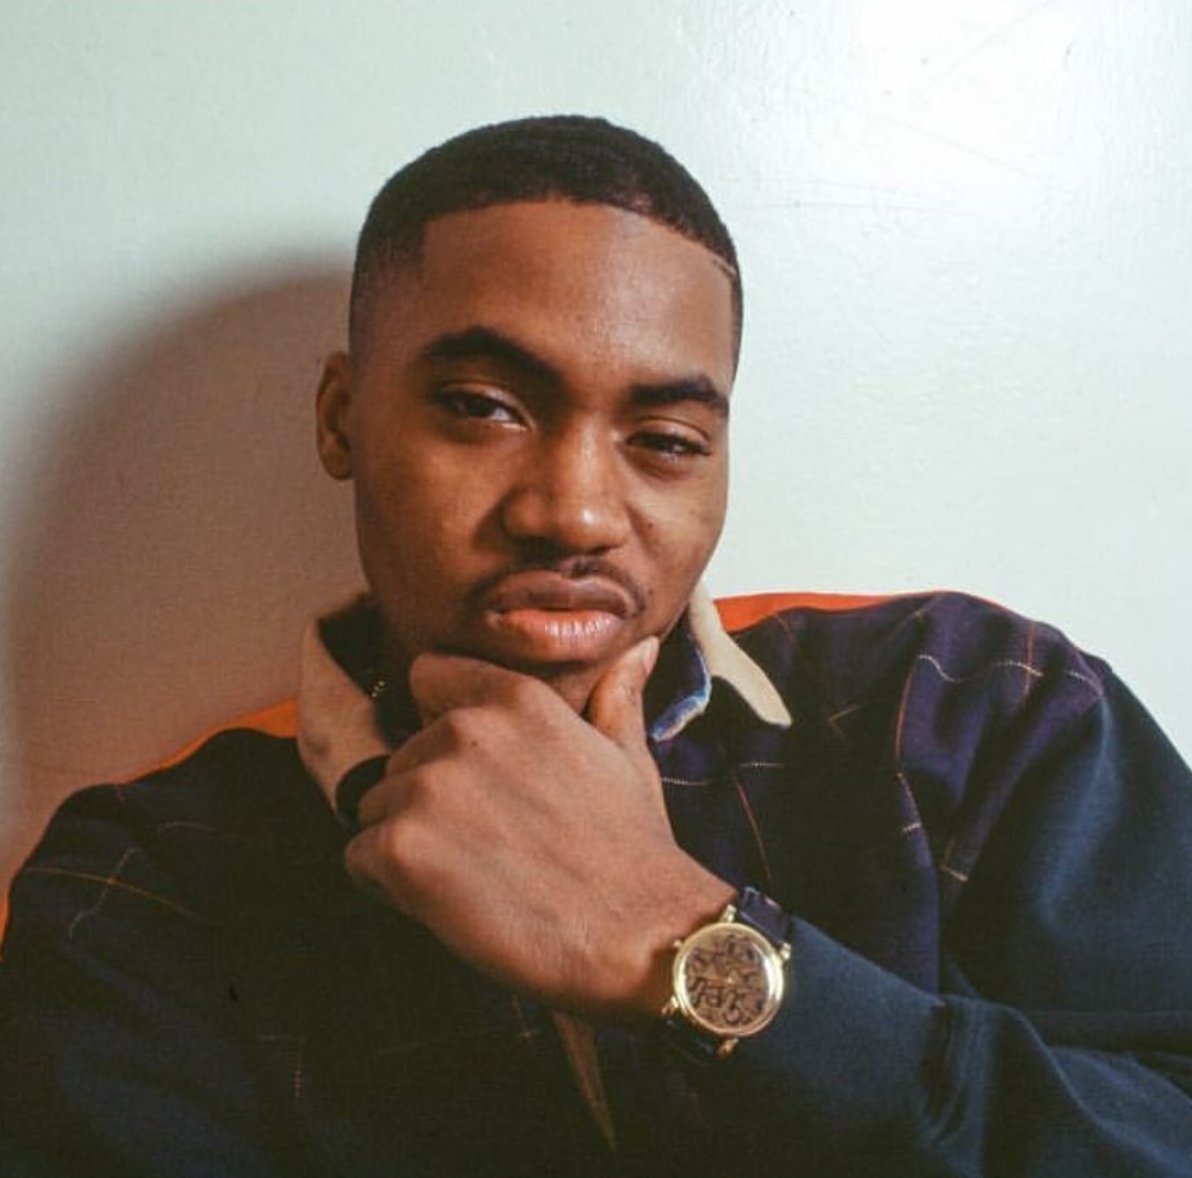 Happy 44th birthday to nas! chimodu

What are your top 3 songs of all time?   